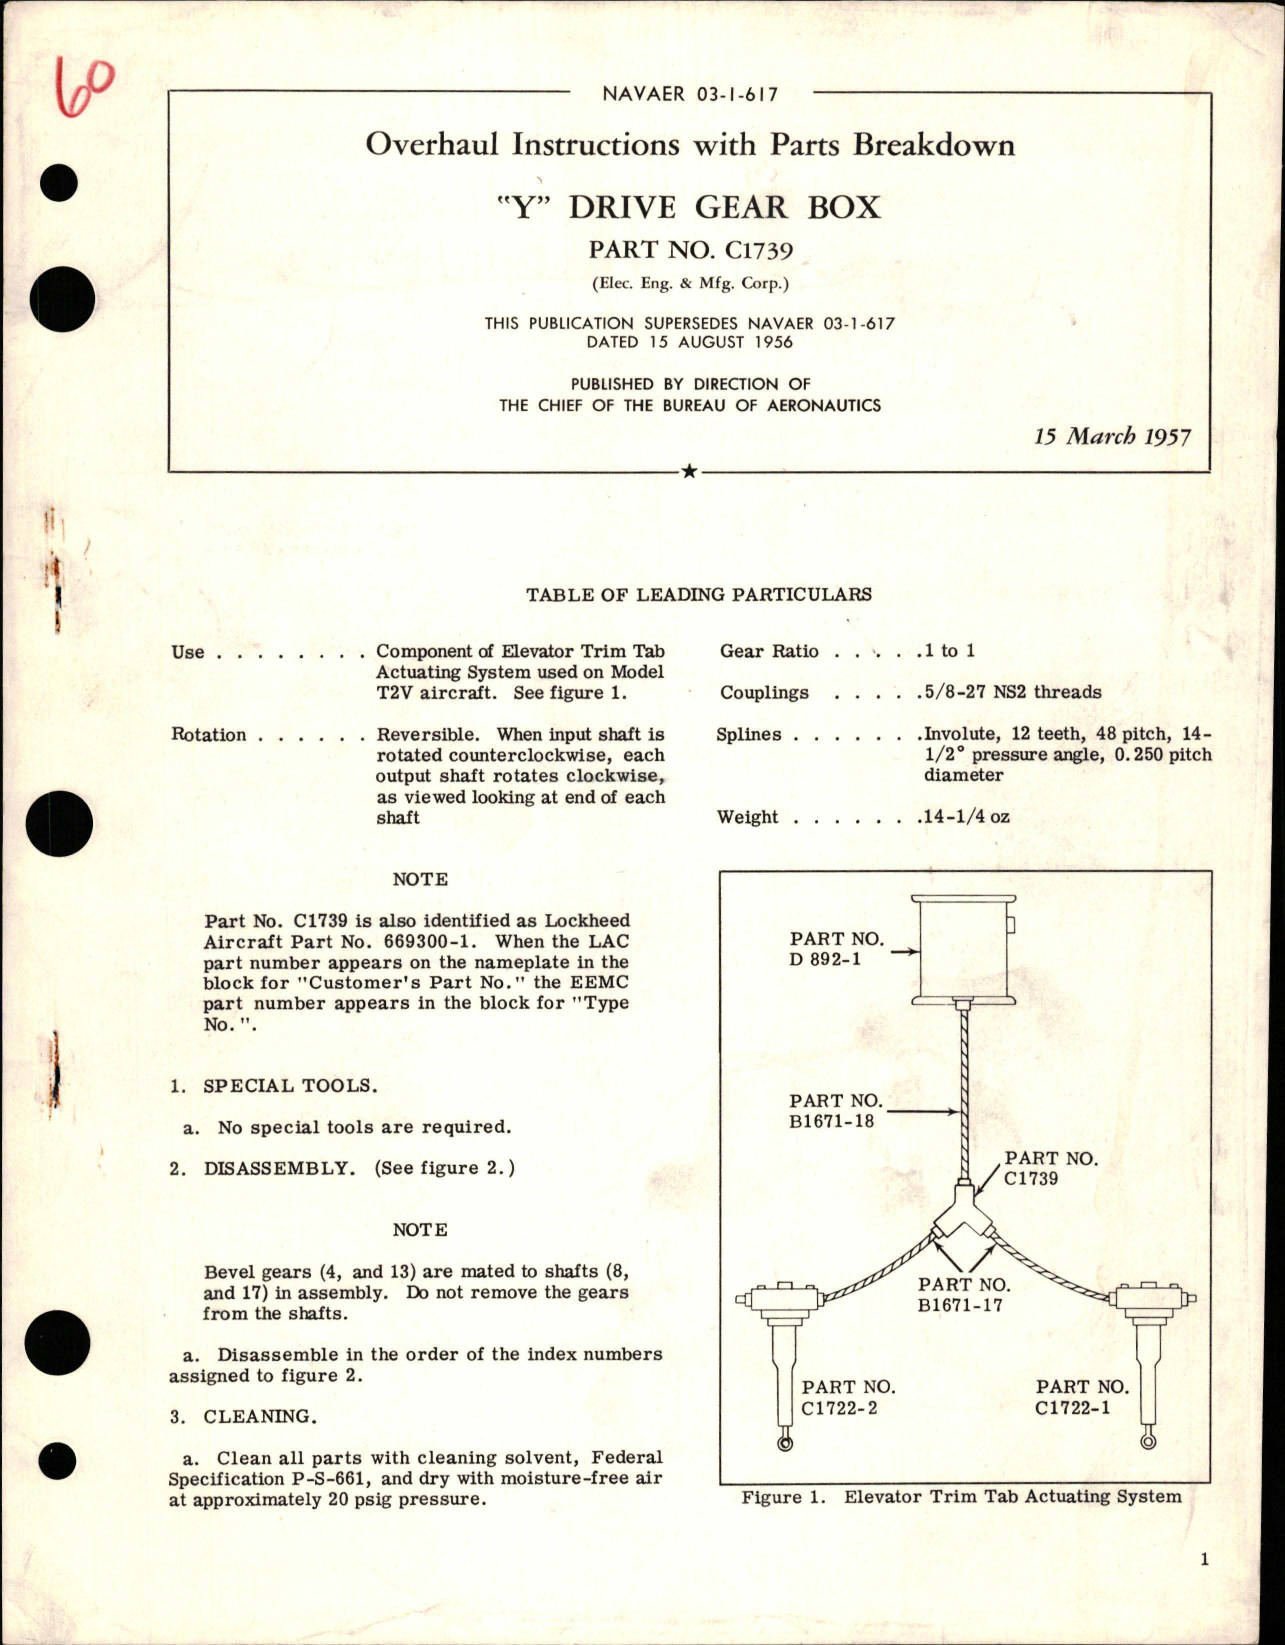 Sample page 1 from AirCorps Library document: Overhaul Instructions with Parts Breakdown for Y Drive Gear Box - Part C1739 